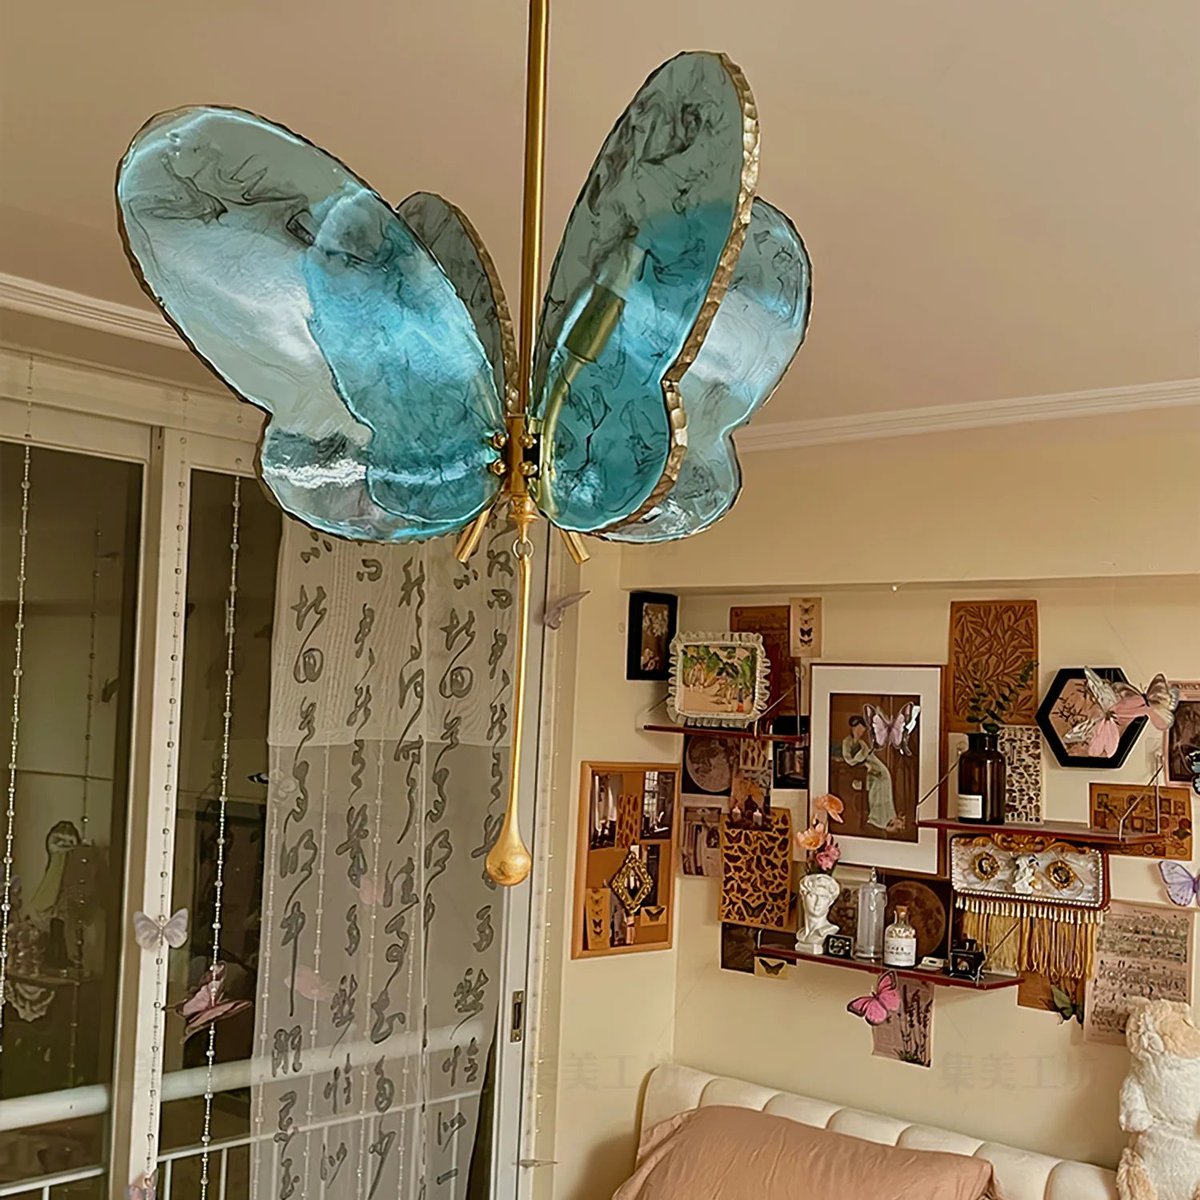 The Sabrina Butterfly Pendant Lamp is a unique and beautifully designed piece made of metal and resin.

dekorfine.com/.../sabrina-bu…
#interiorstyling #designinspiration #bedroominspiration #vogueliving #slowliving #art #homestyle #homedesign #giftideas